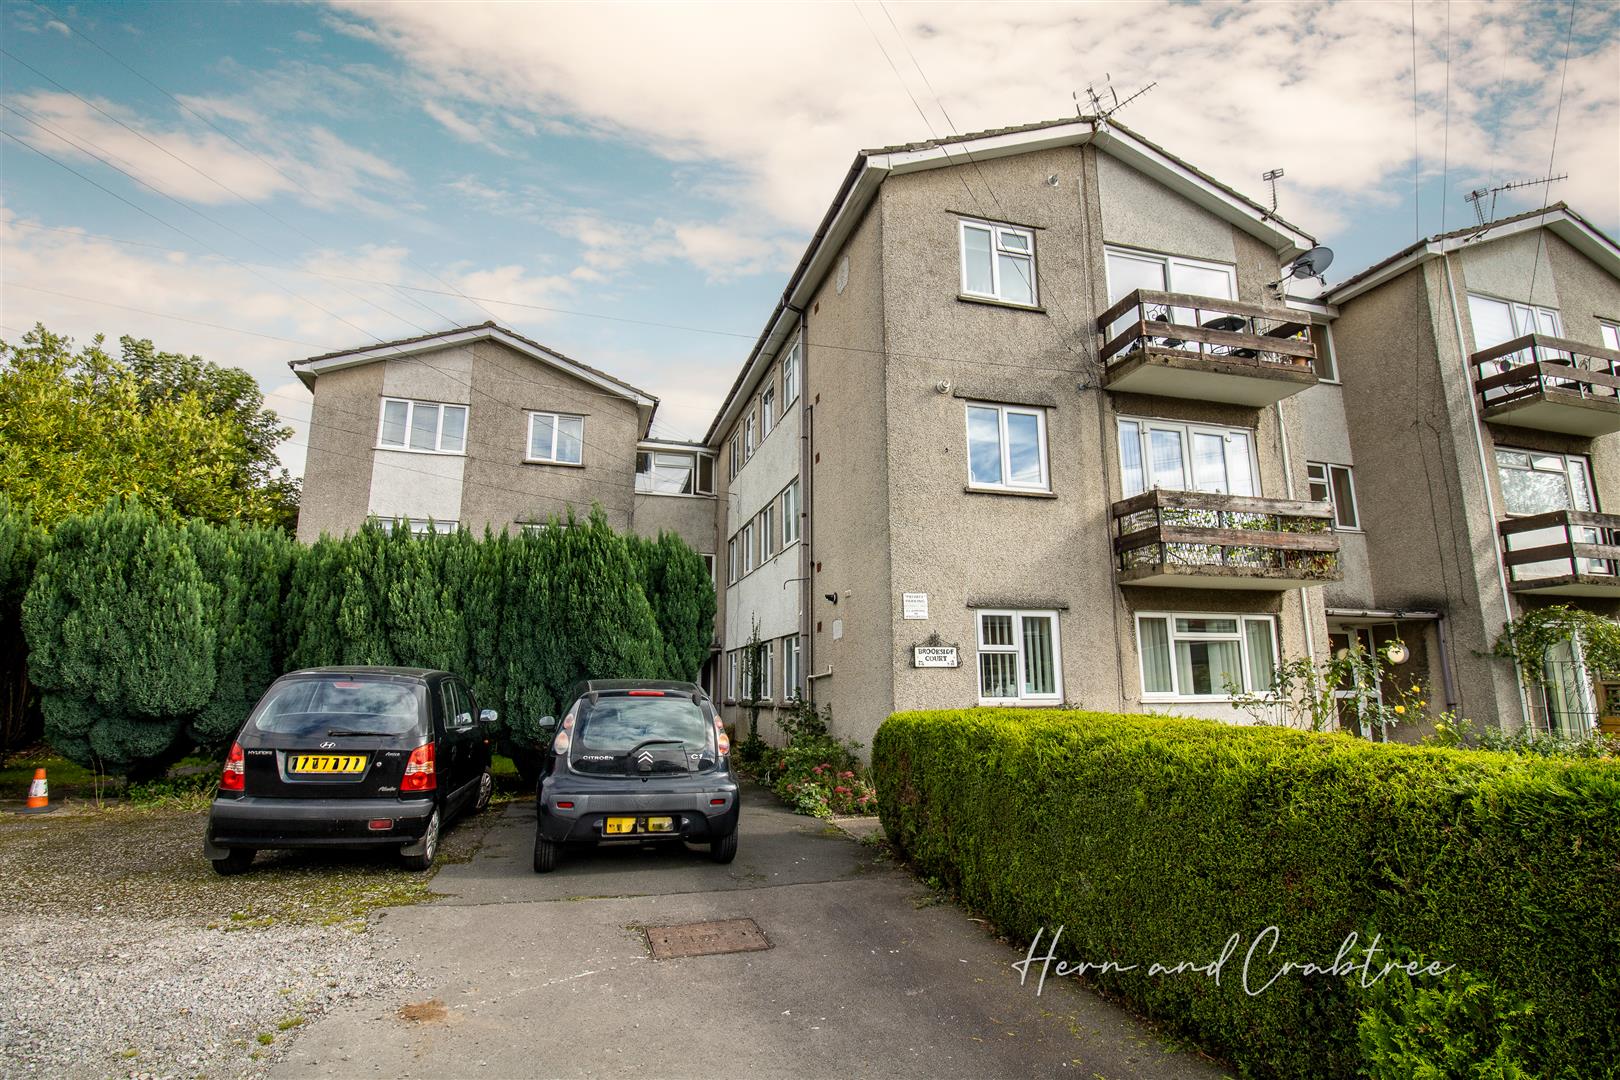 Brookside Court, Glan Y Nant Road, Whitchurch, CARDIFF CF14 1AQ